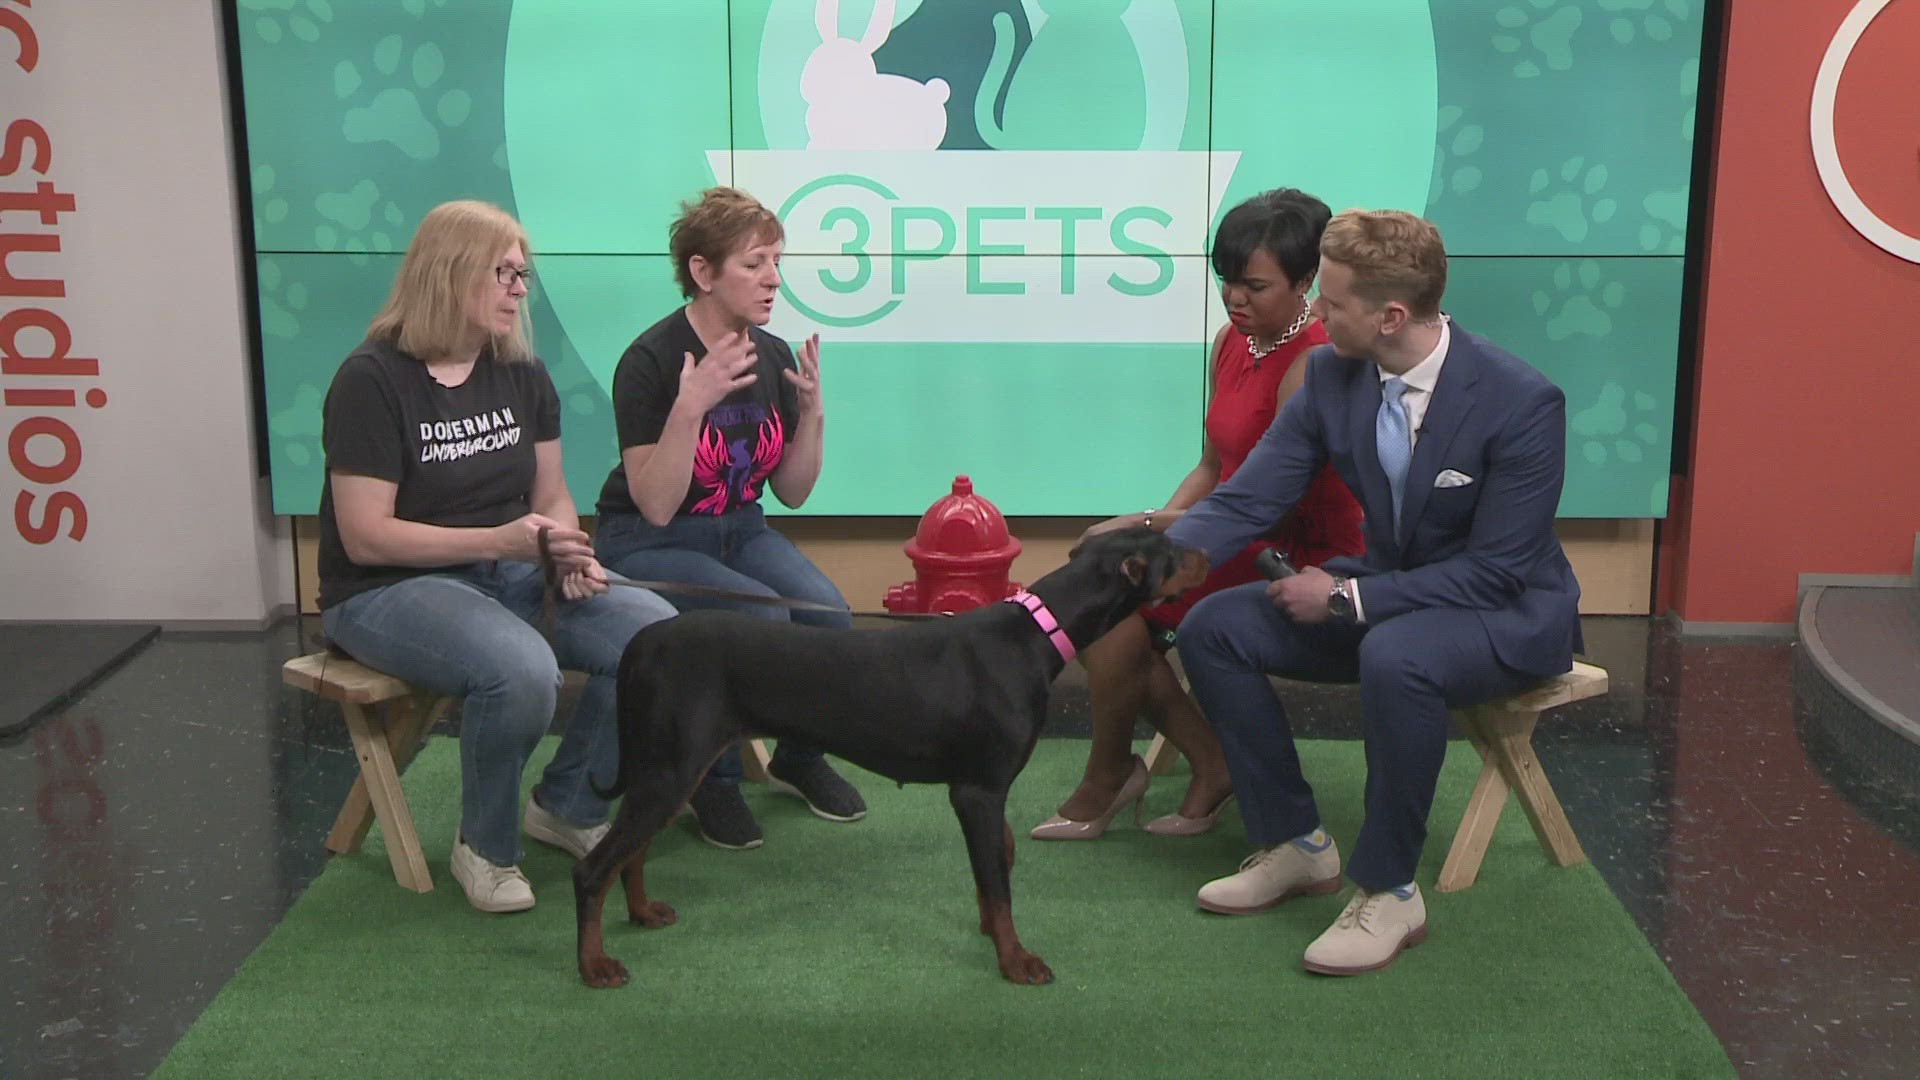 Doberman Underground visited 3News for this week's Pet of the Week segment.